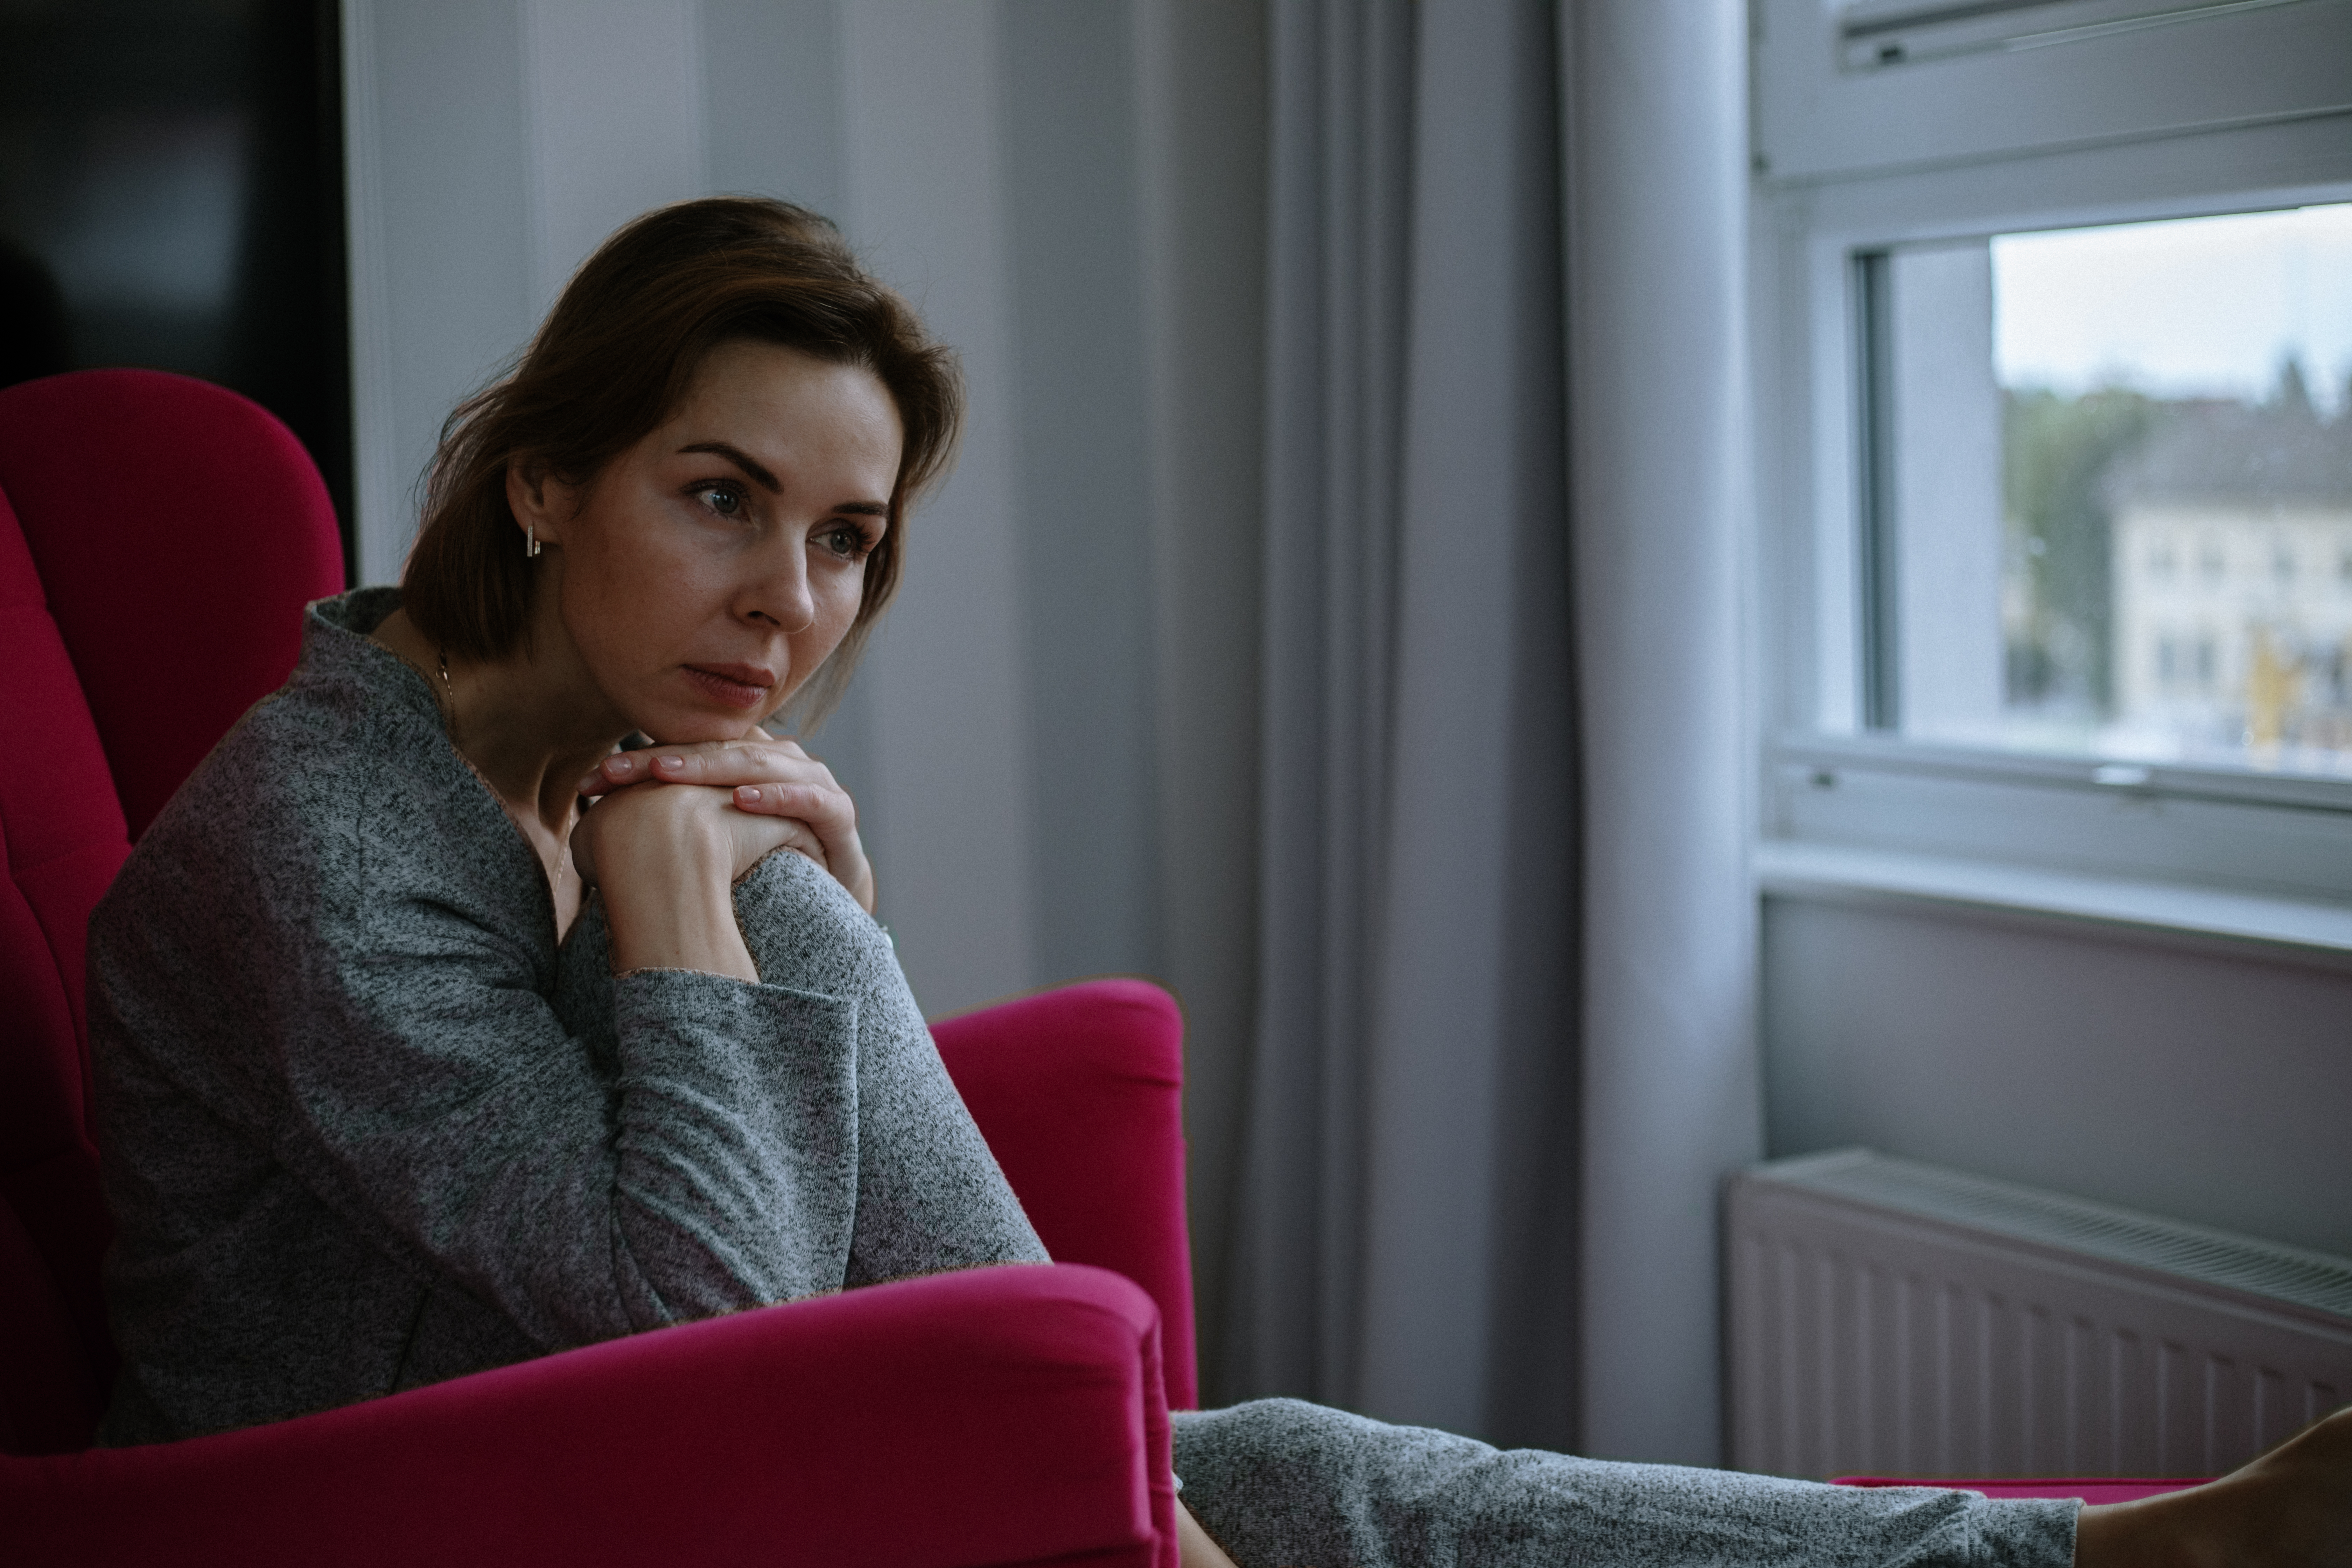 Lounging in comfy red armchair, serene woman in gray home attire sits deep in thought with sense of subdued depression | Source: Getty Images